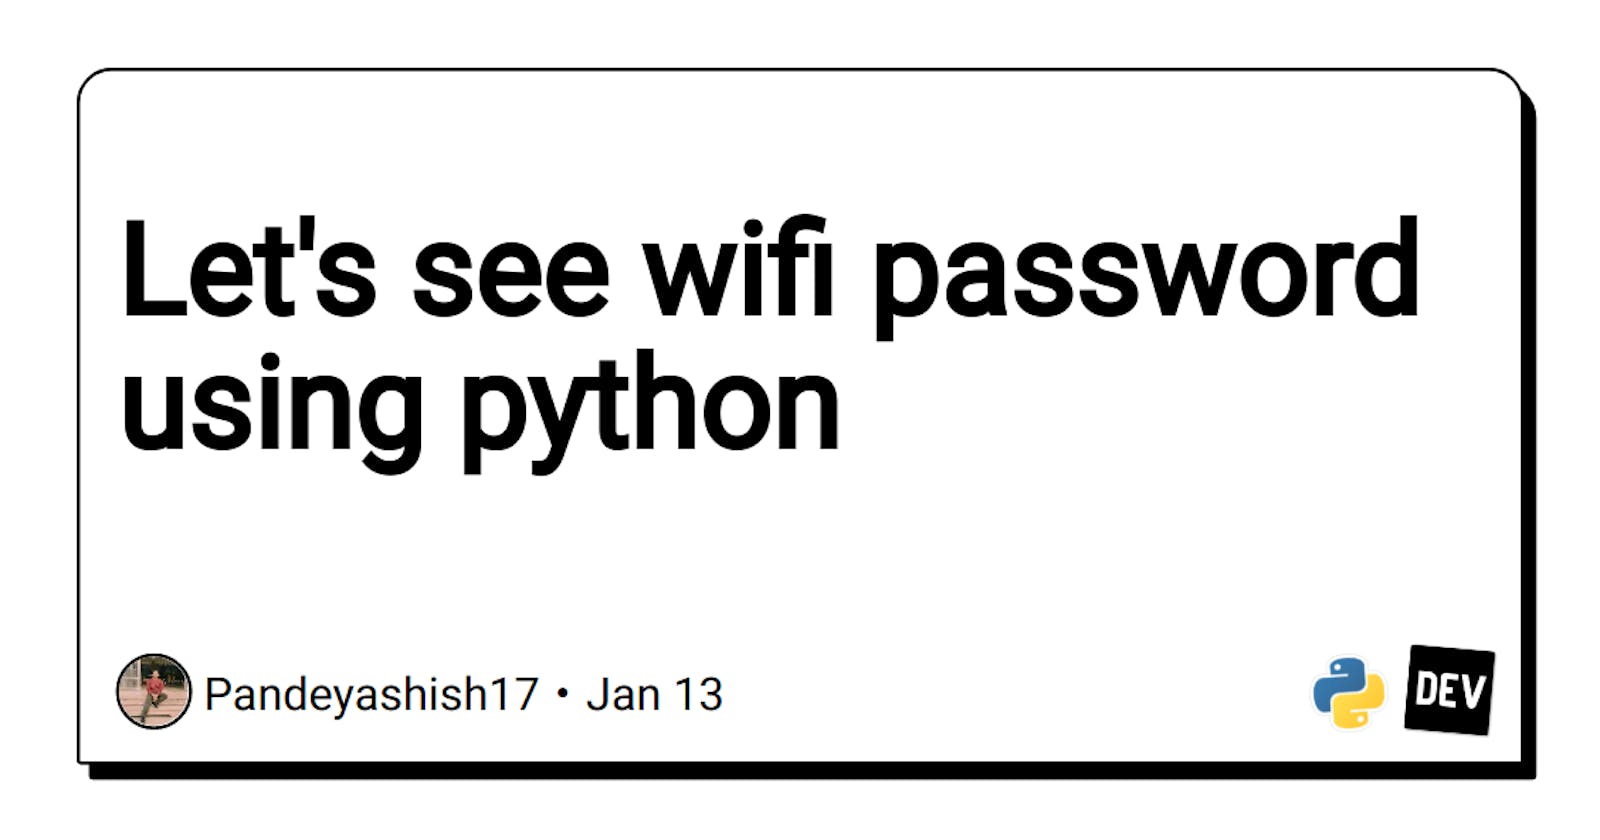 Let's see wifi password using python